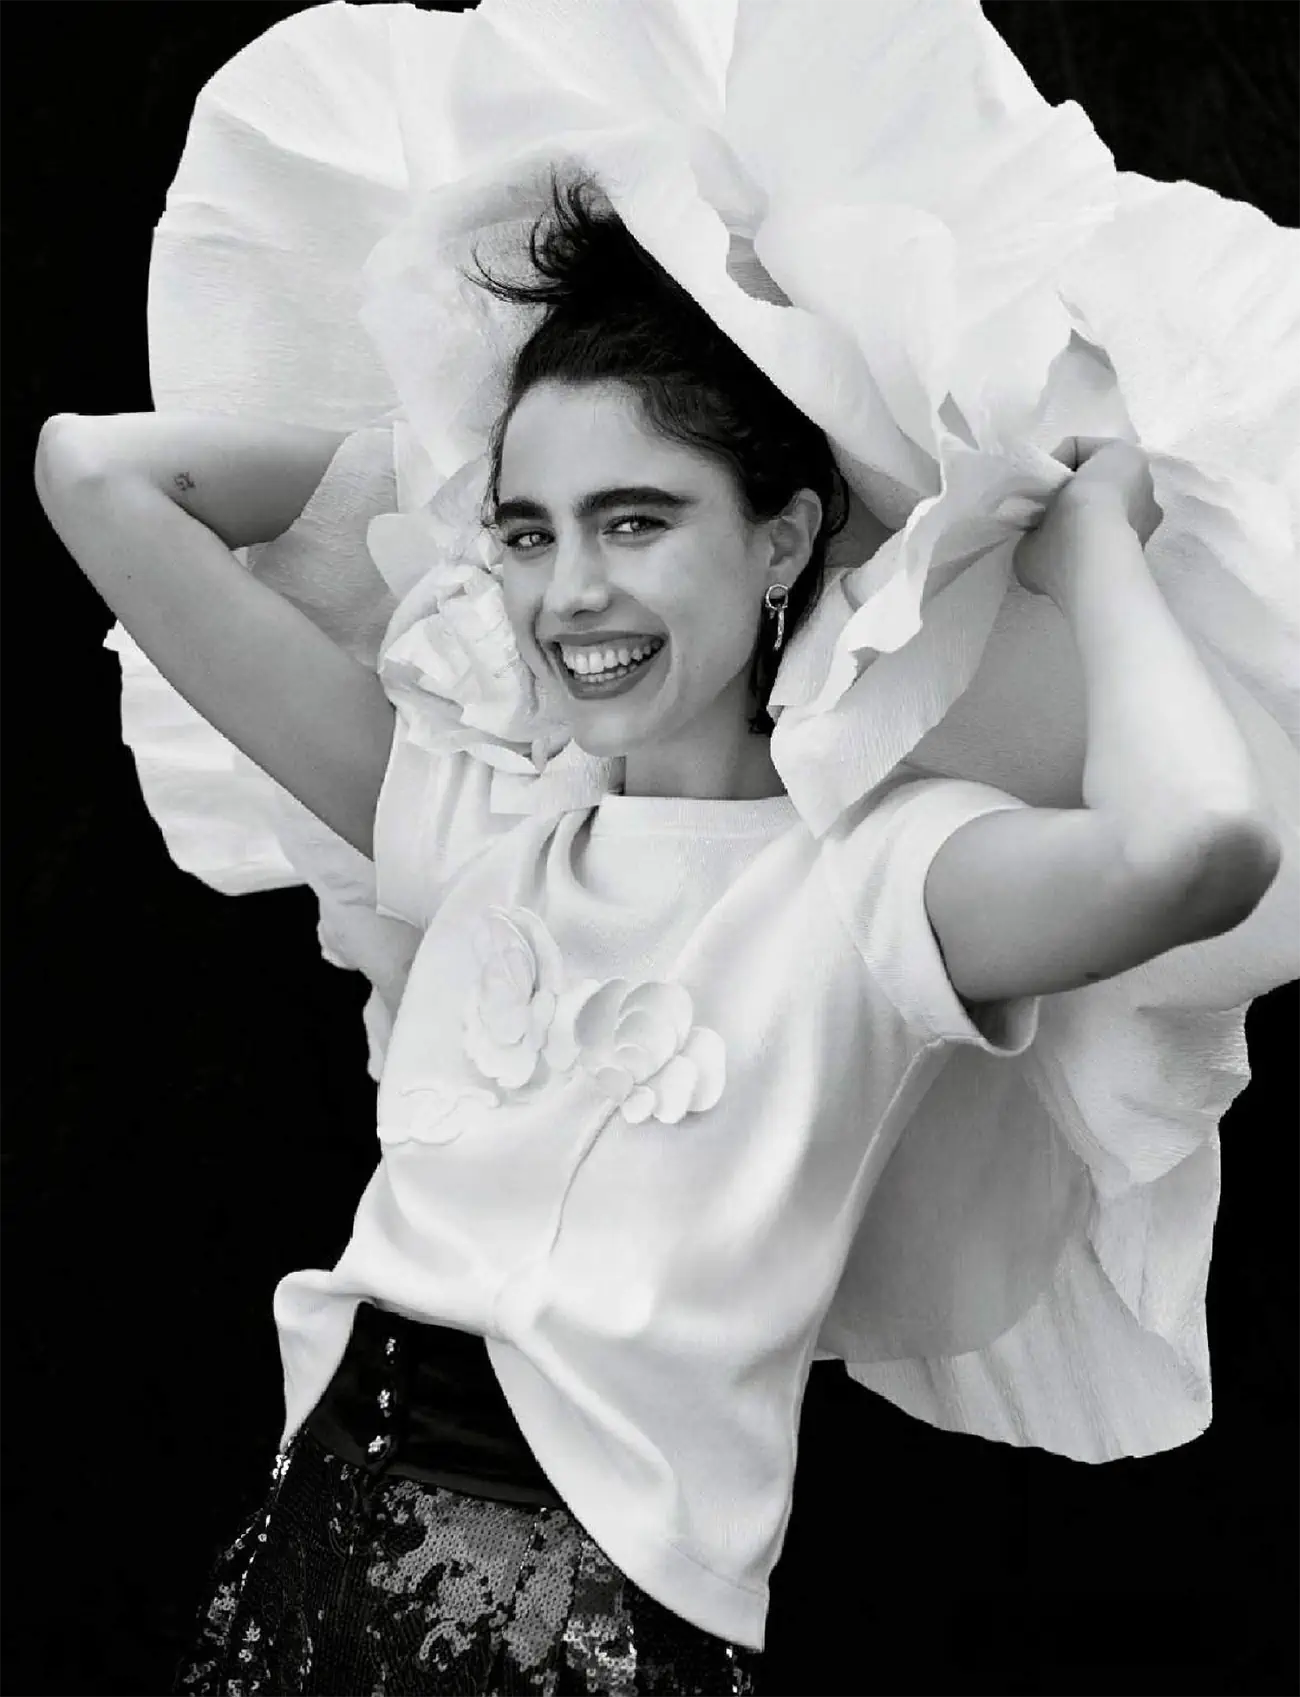 Margaret Qualley covers Elle France November 16th, 2023 by Cass Bird